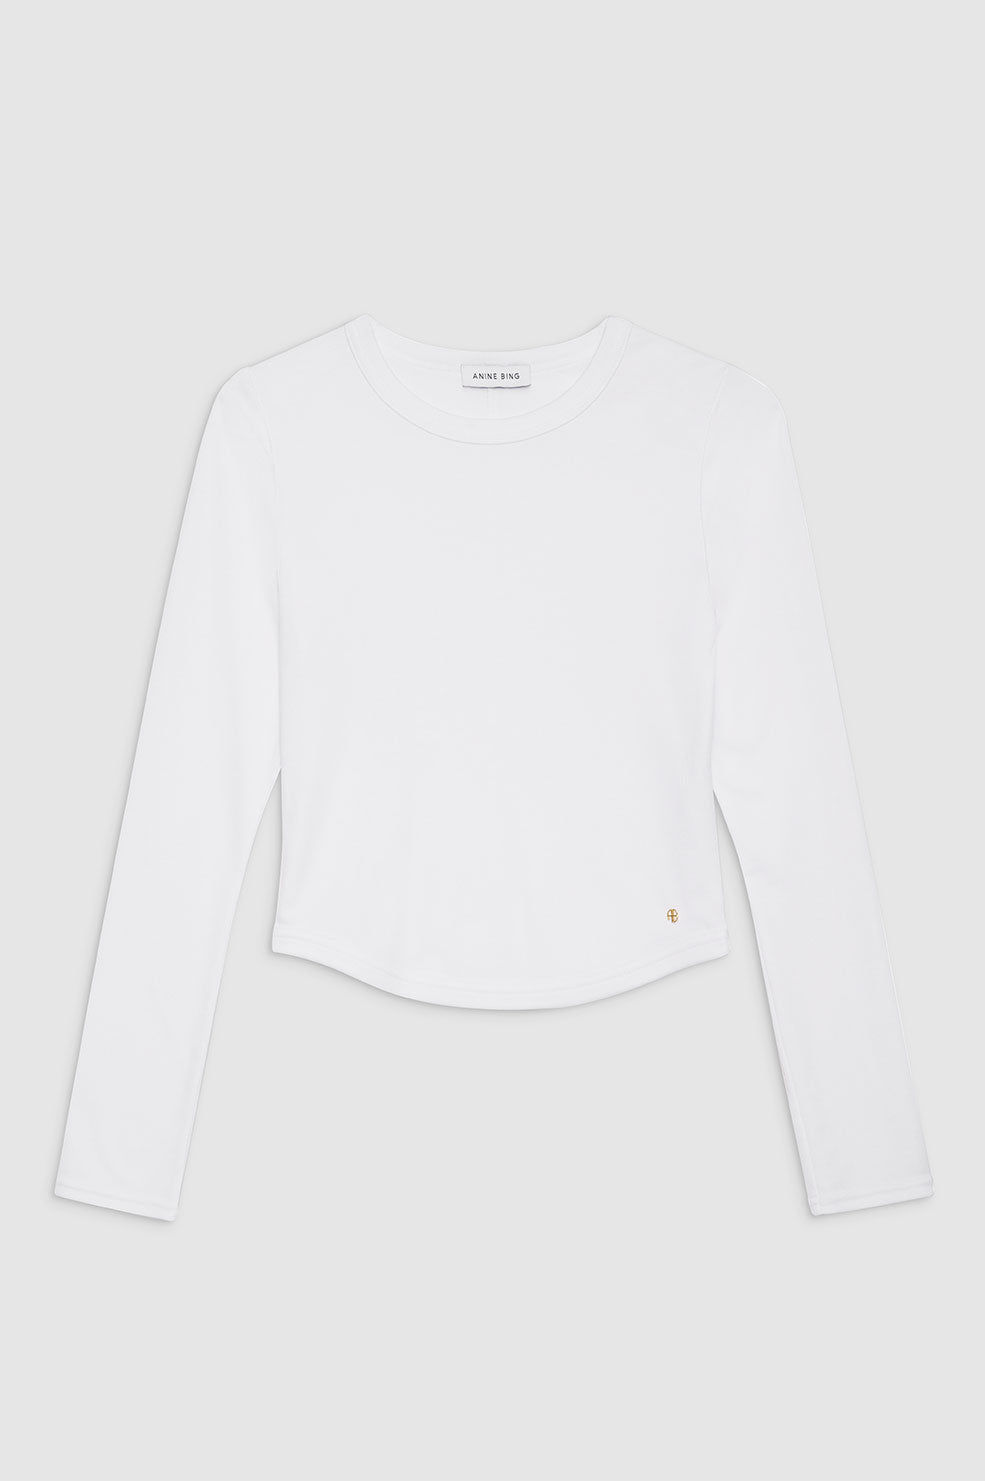 ANINE BING Jane Top - White - Front View